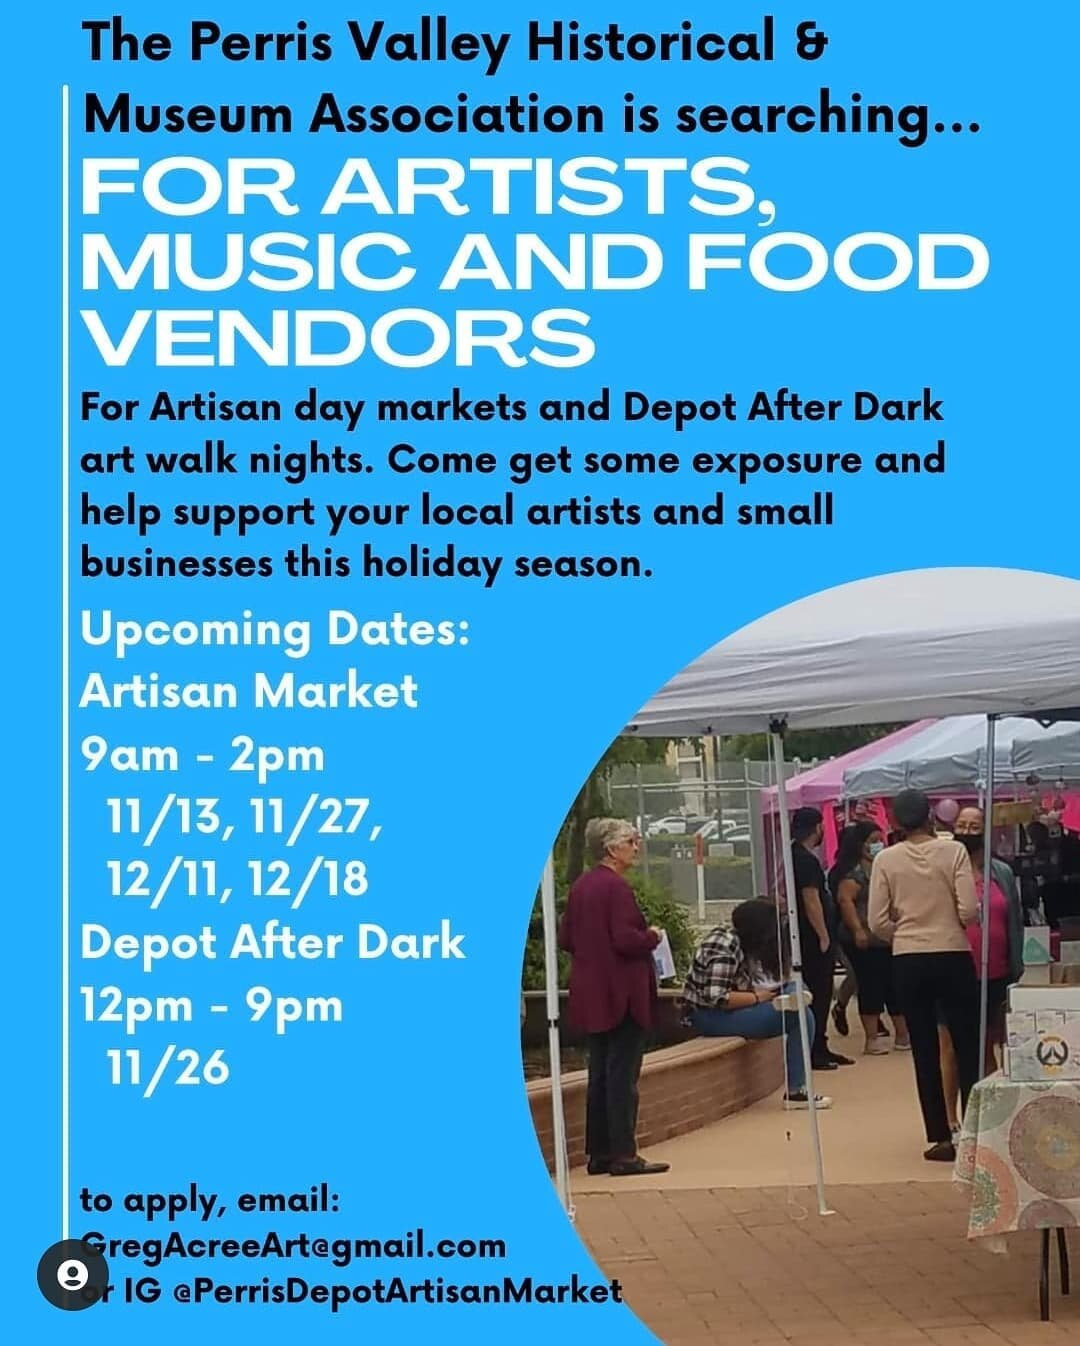 Going to be selling paintings and prints here. Come by if you wanna support the arts.